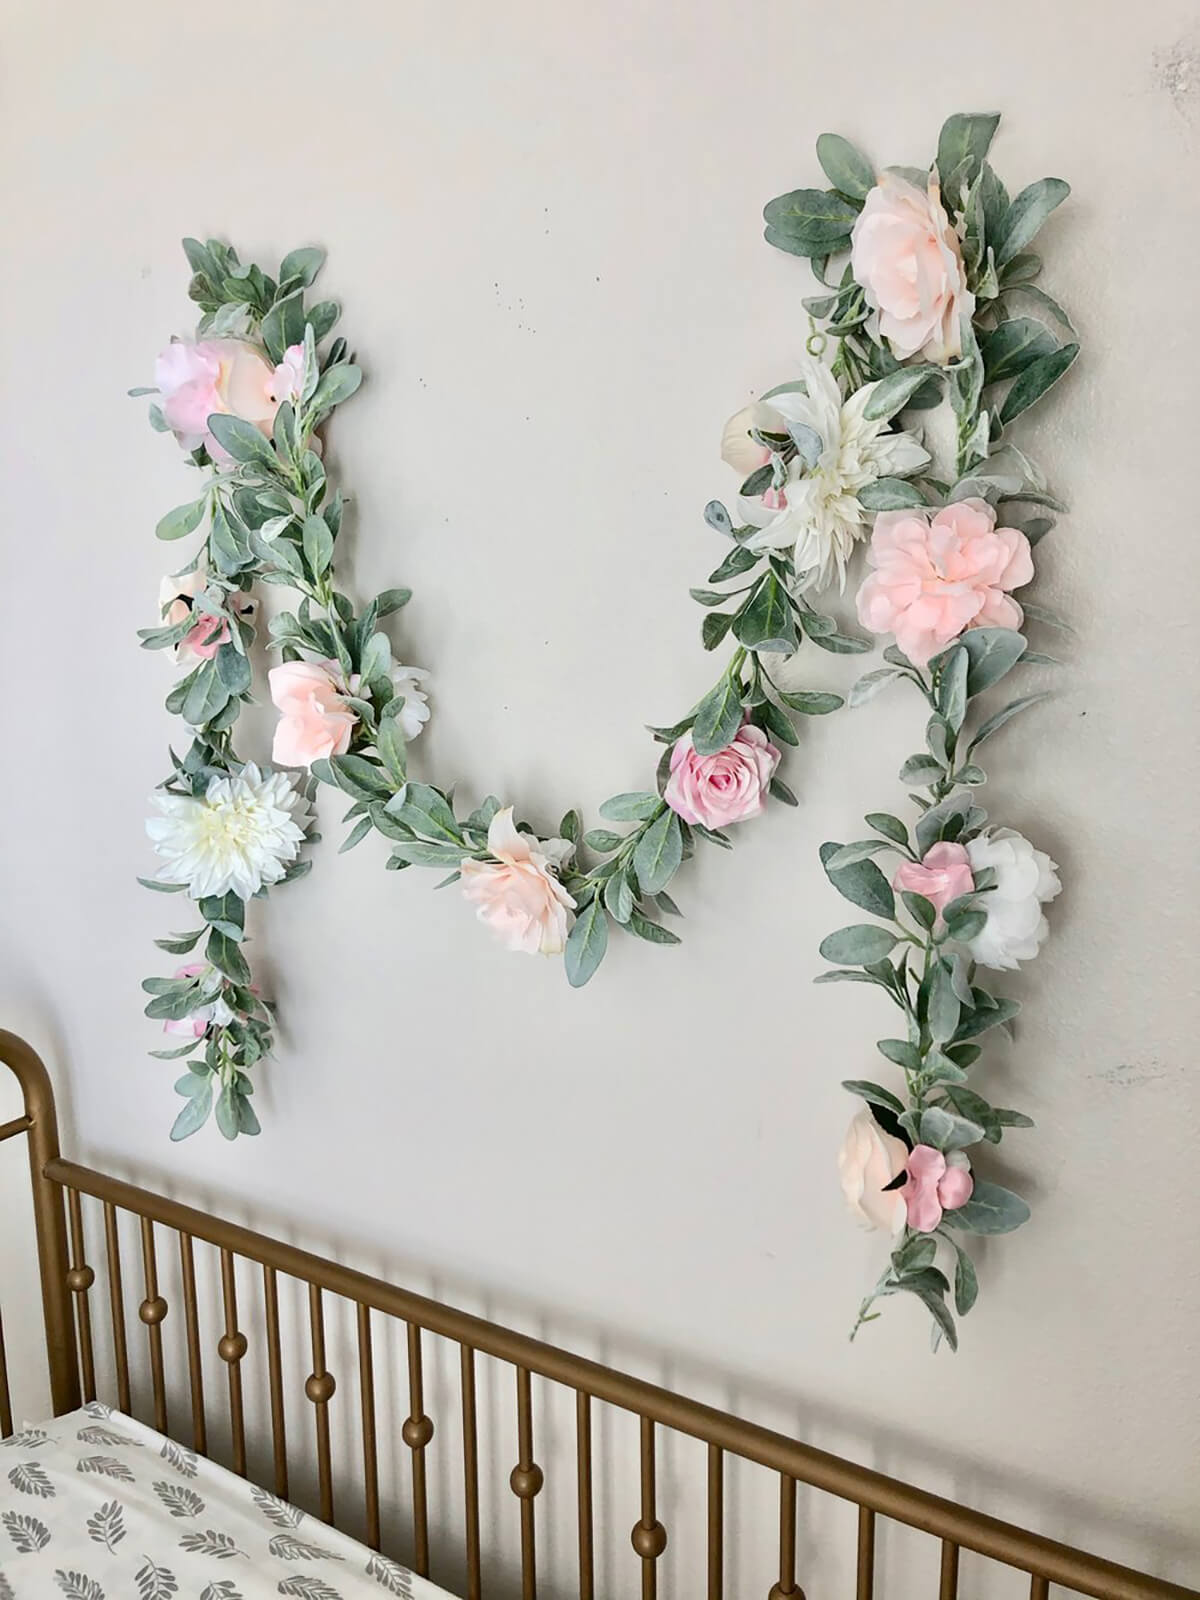 Eucalyptus Green, Light Pink and White Peaceful and Pretty Floral Garland